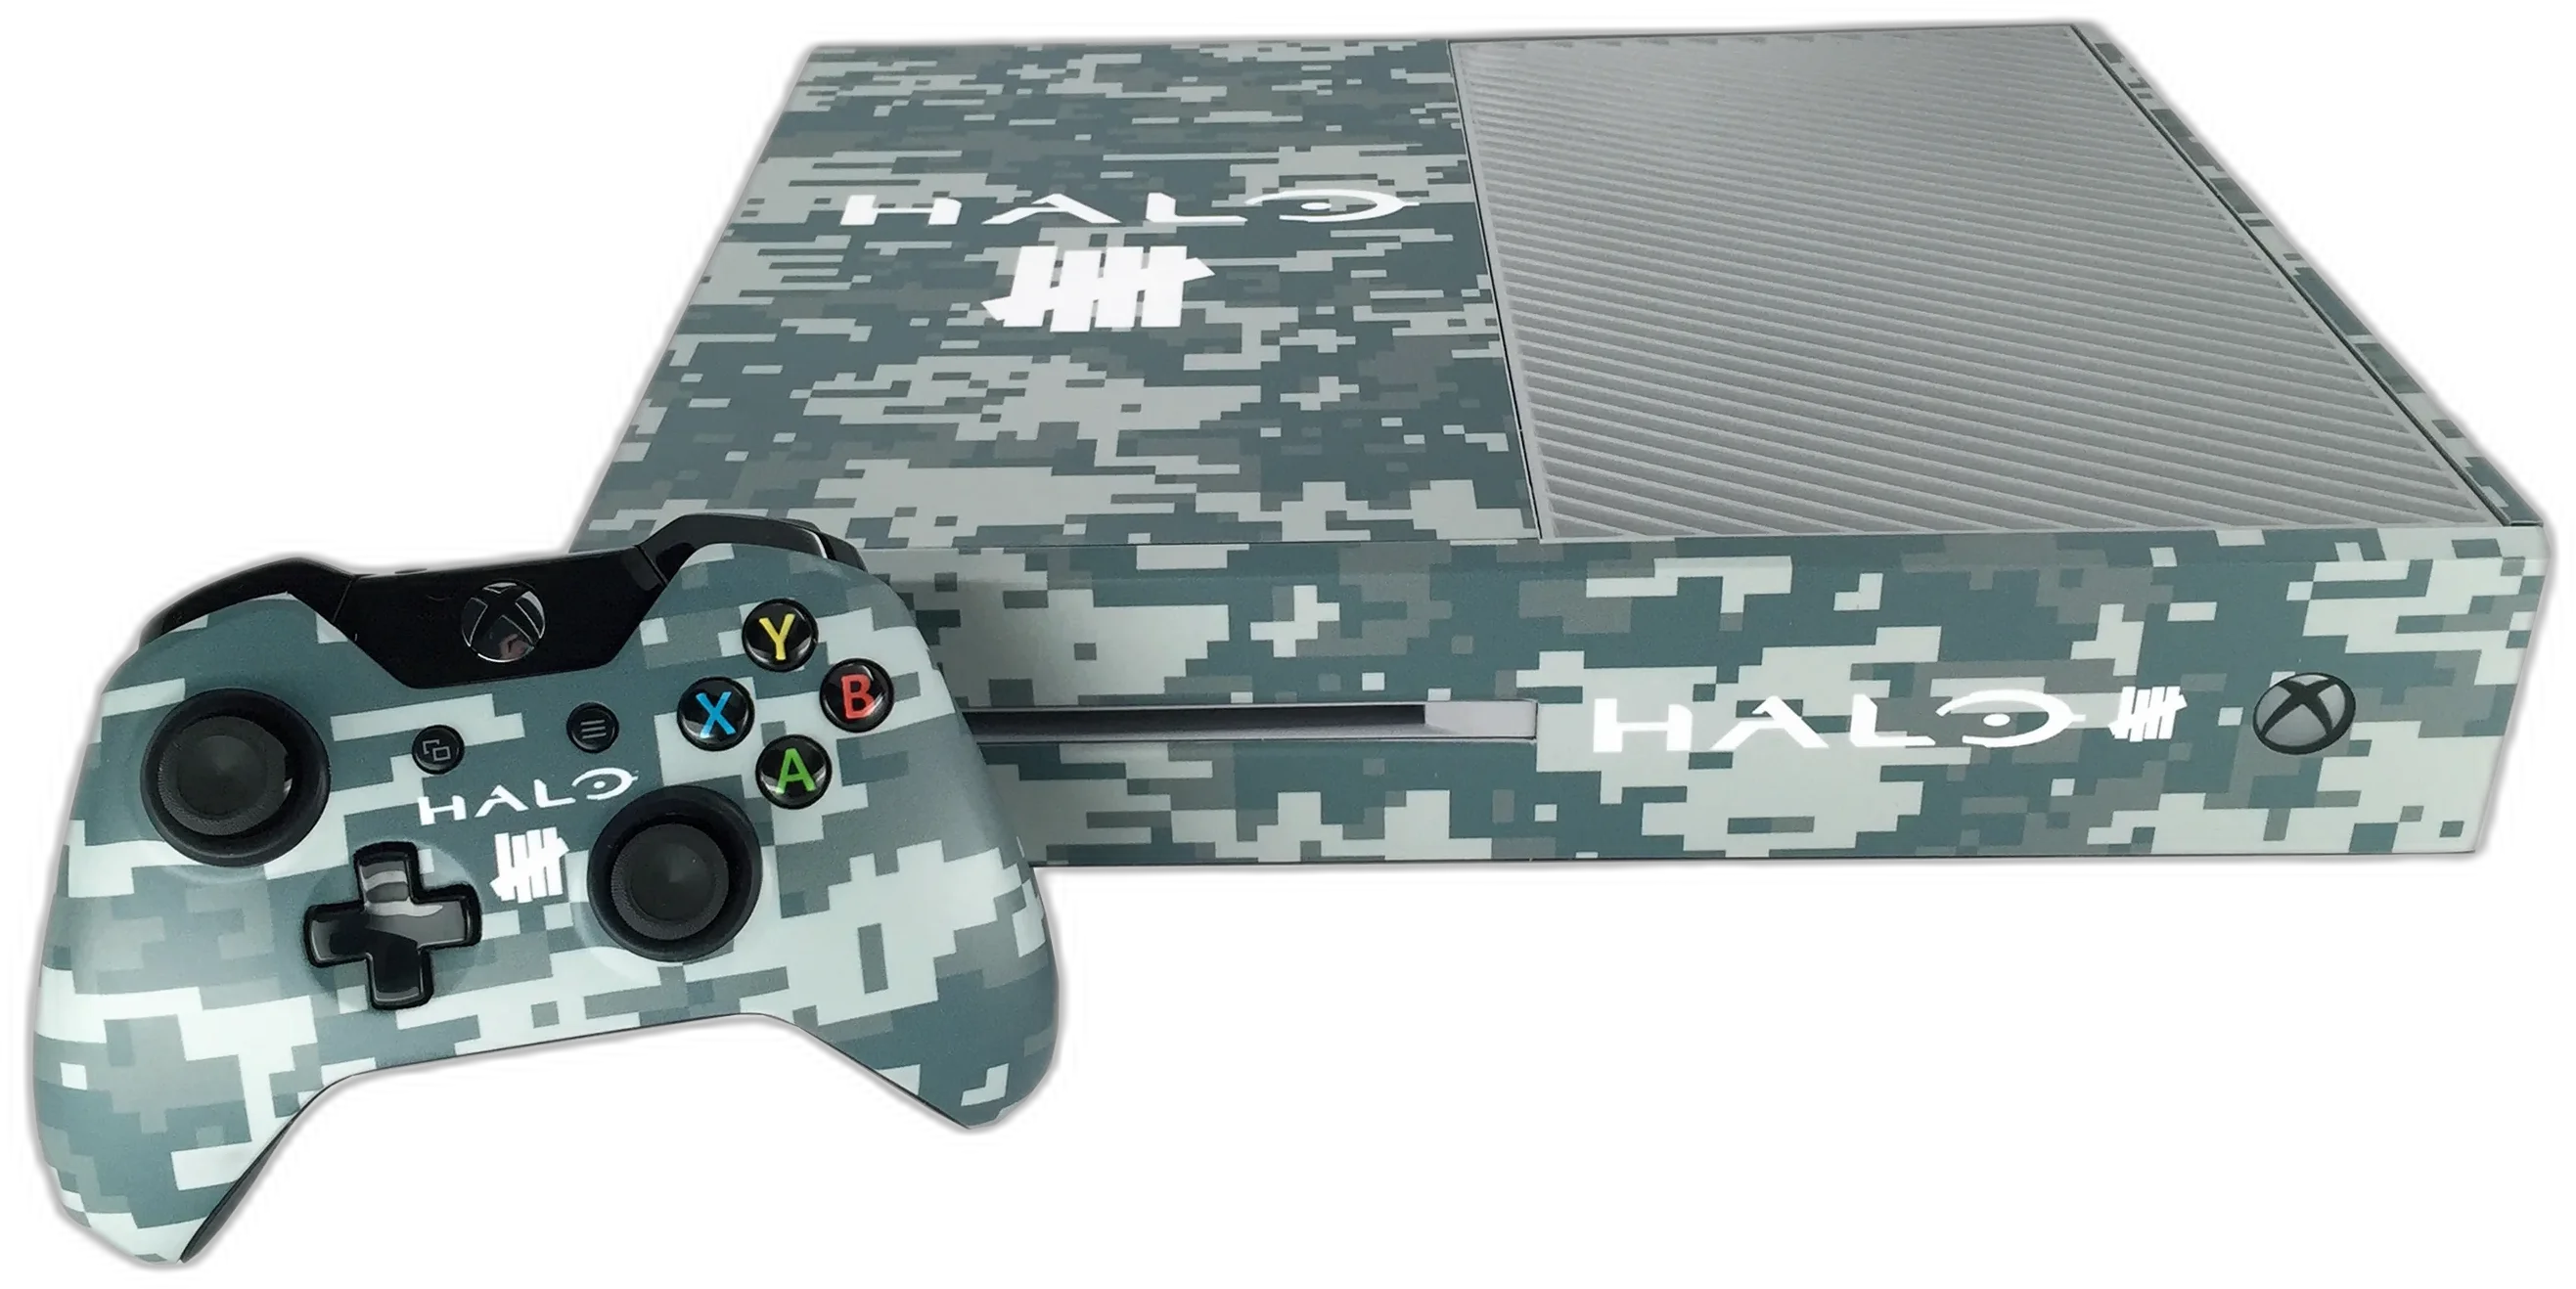  Microsoft Xbox One Halo Undefeated Console